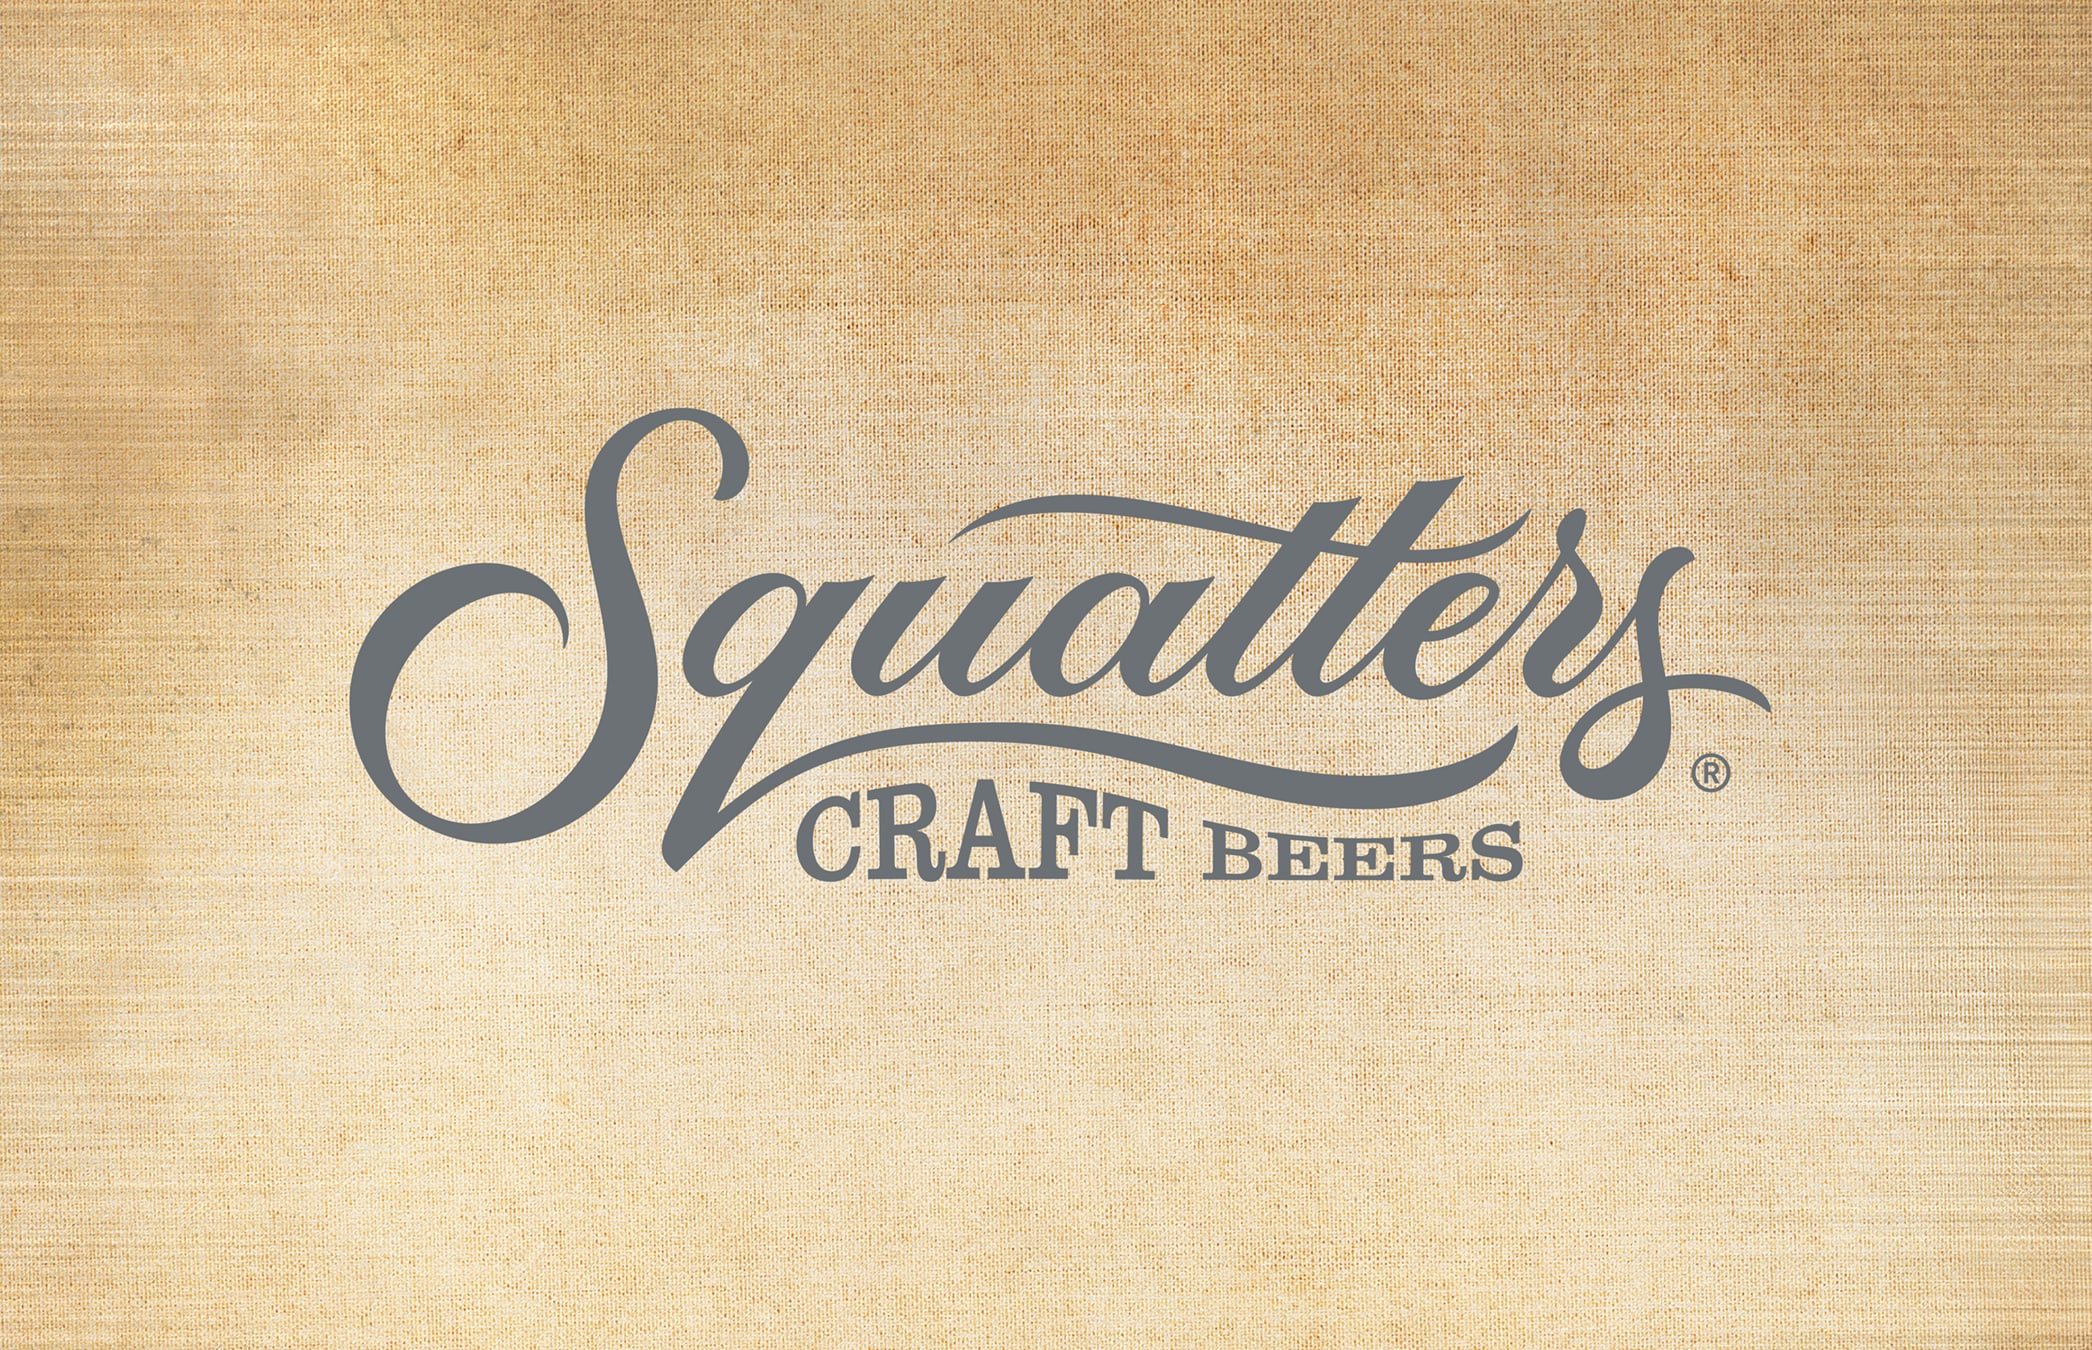 Squatters Craft Beers identity logo design